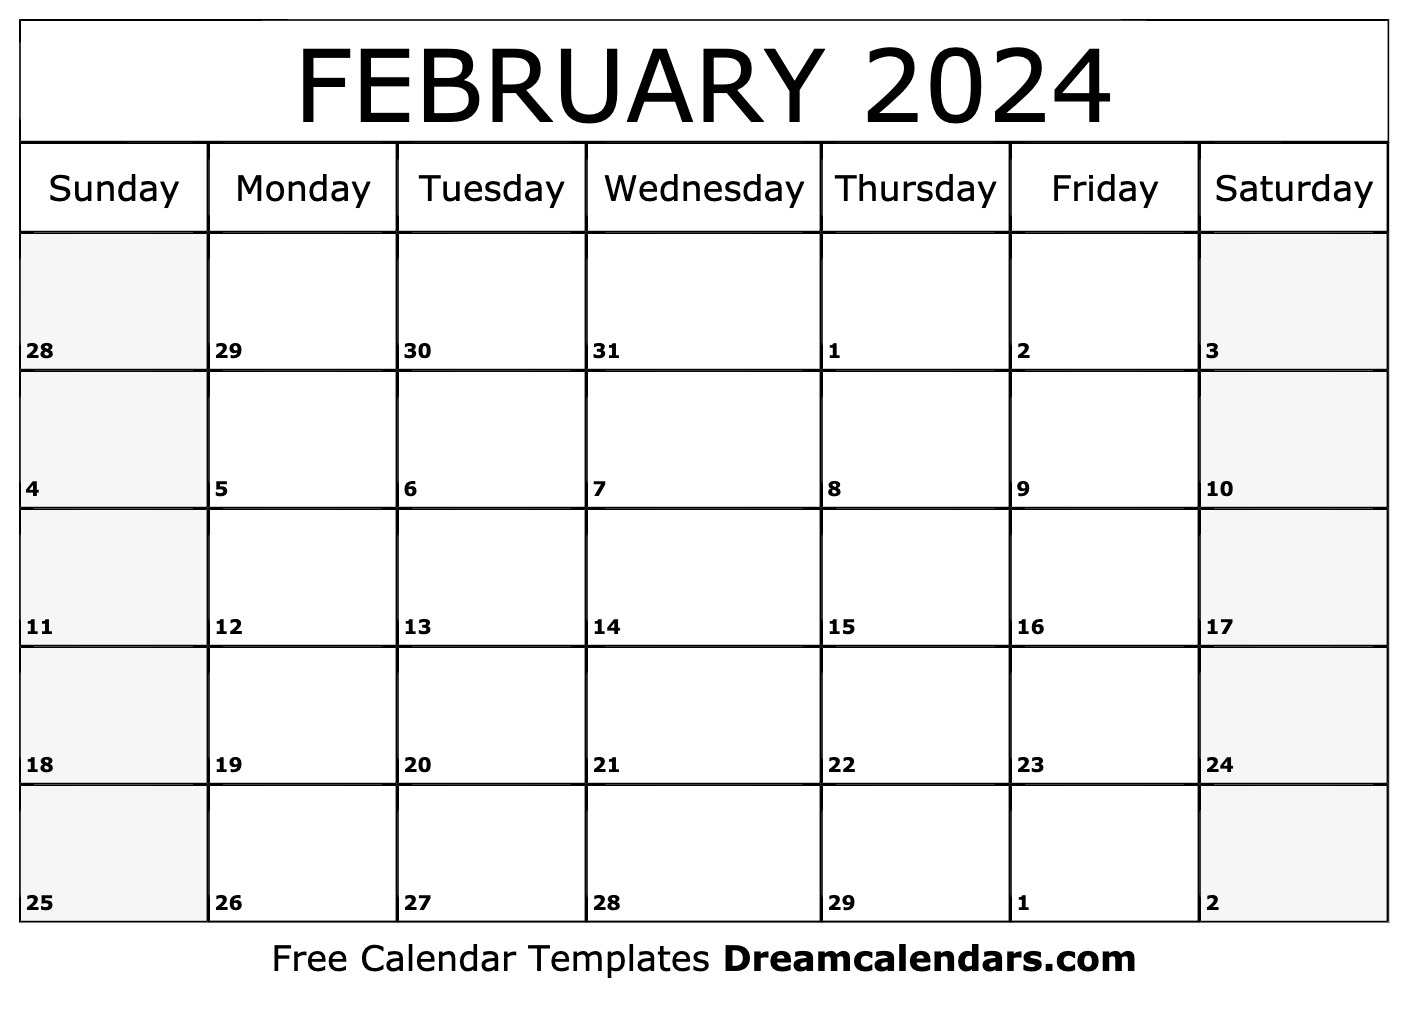 printable-calendar-doc-2024-cool-top-most-popular-review-of-february